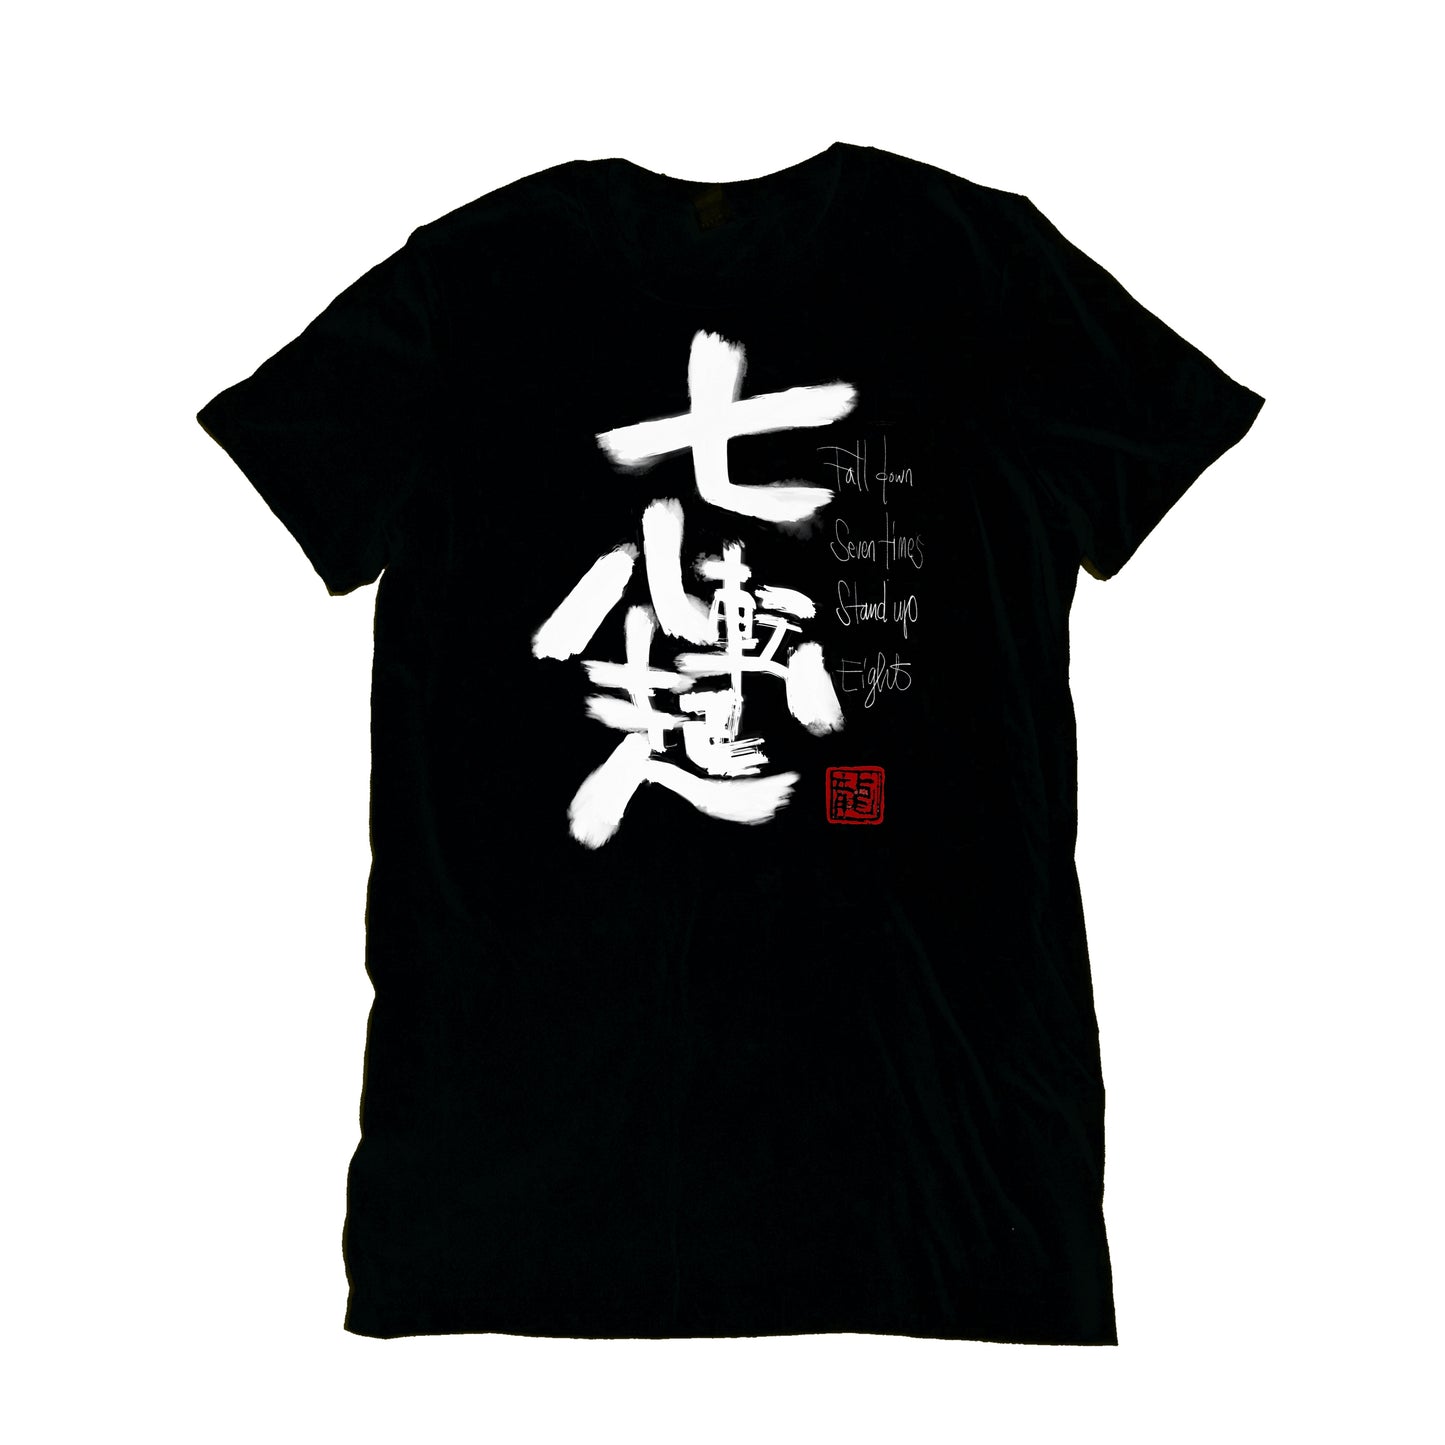 Nanakorobi Yaoki 七転八起 Fall Down Seven Times Stand up Eight -Japanese quote Calligraphy Tee